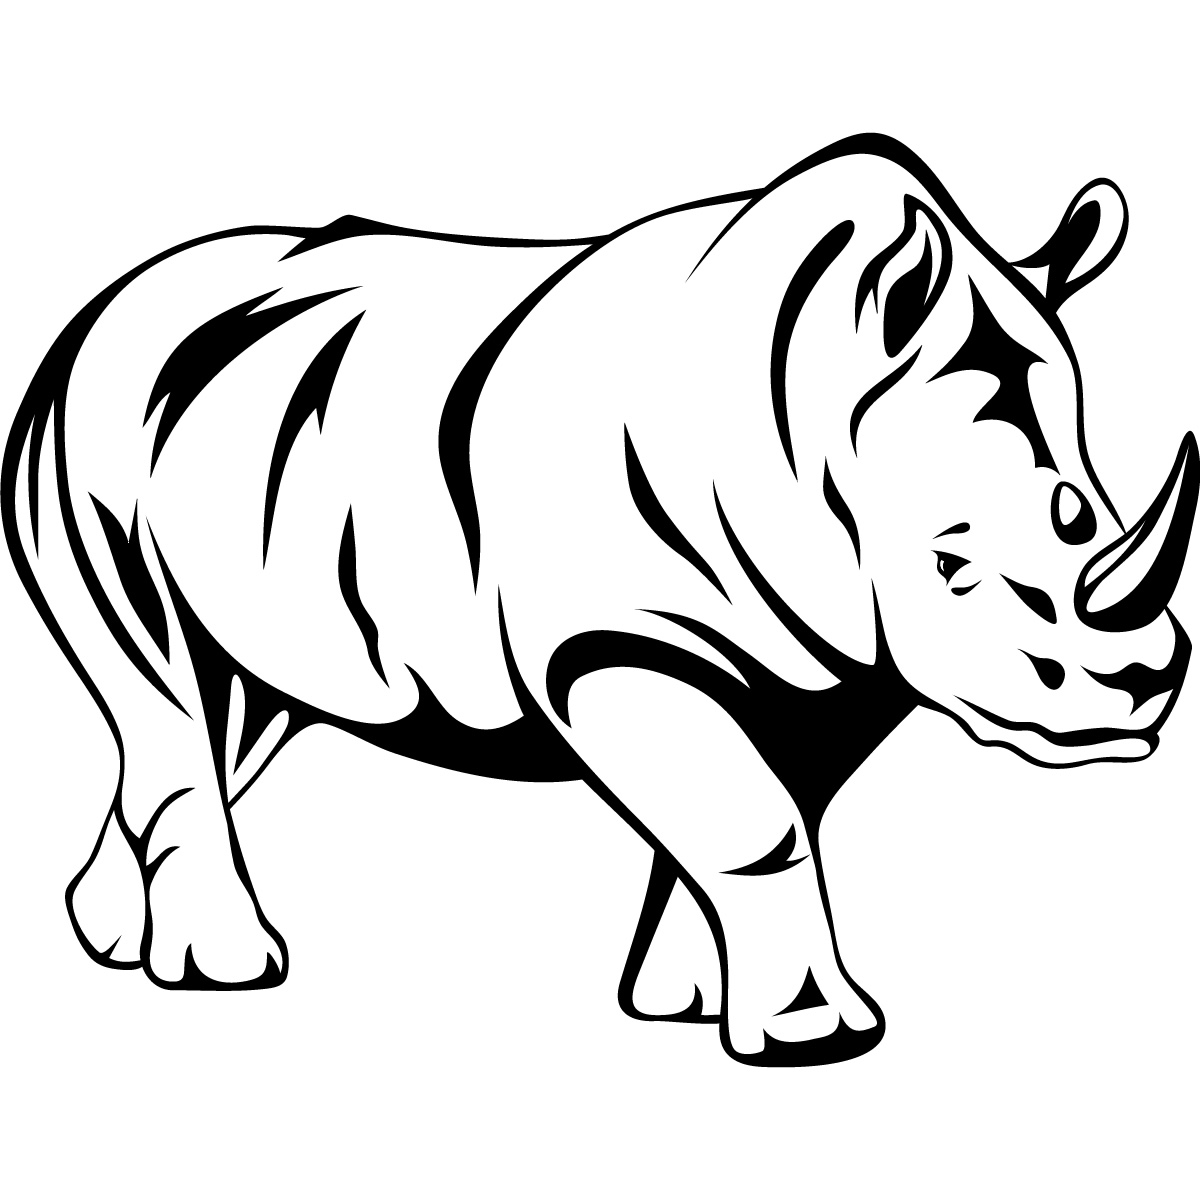 Rhinoceros Side View Outline Animals Wall Decal Wall Art Sticker